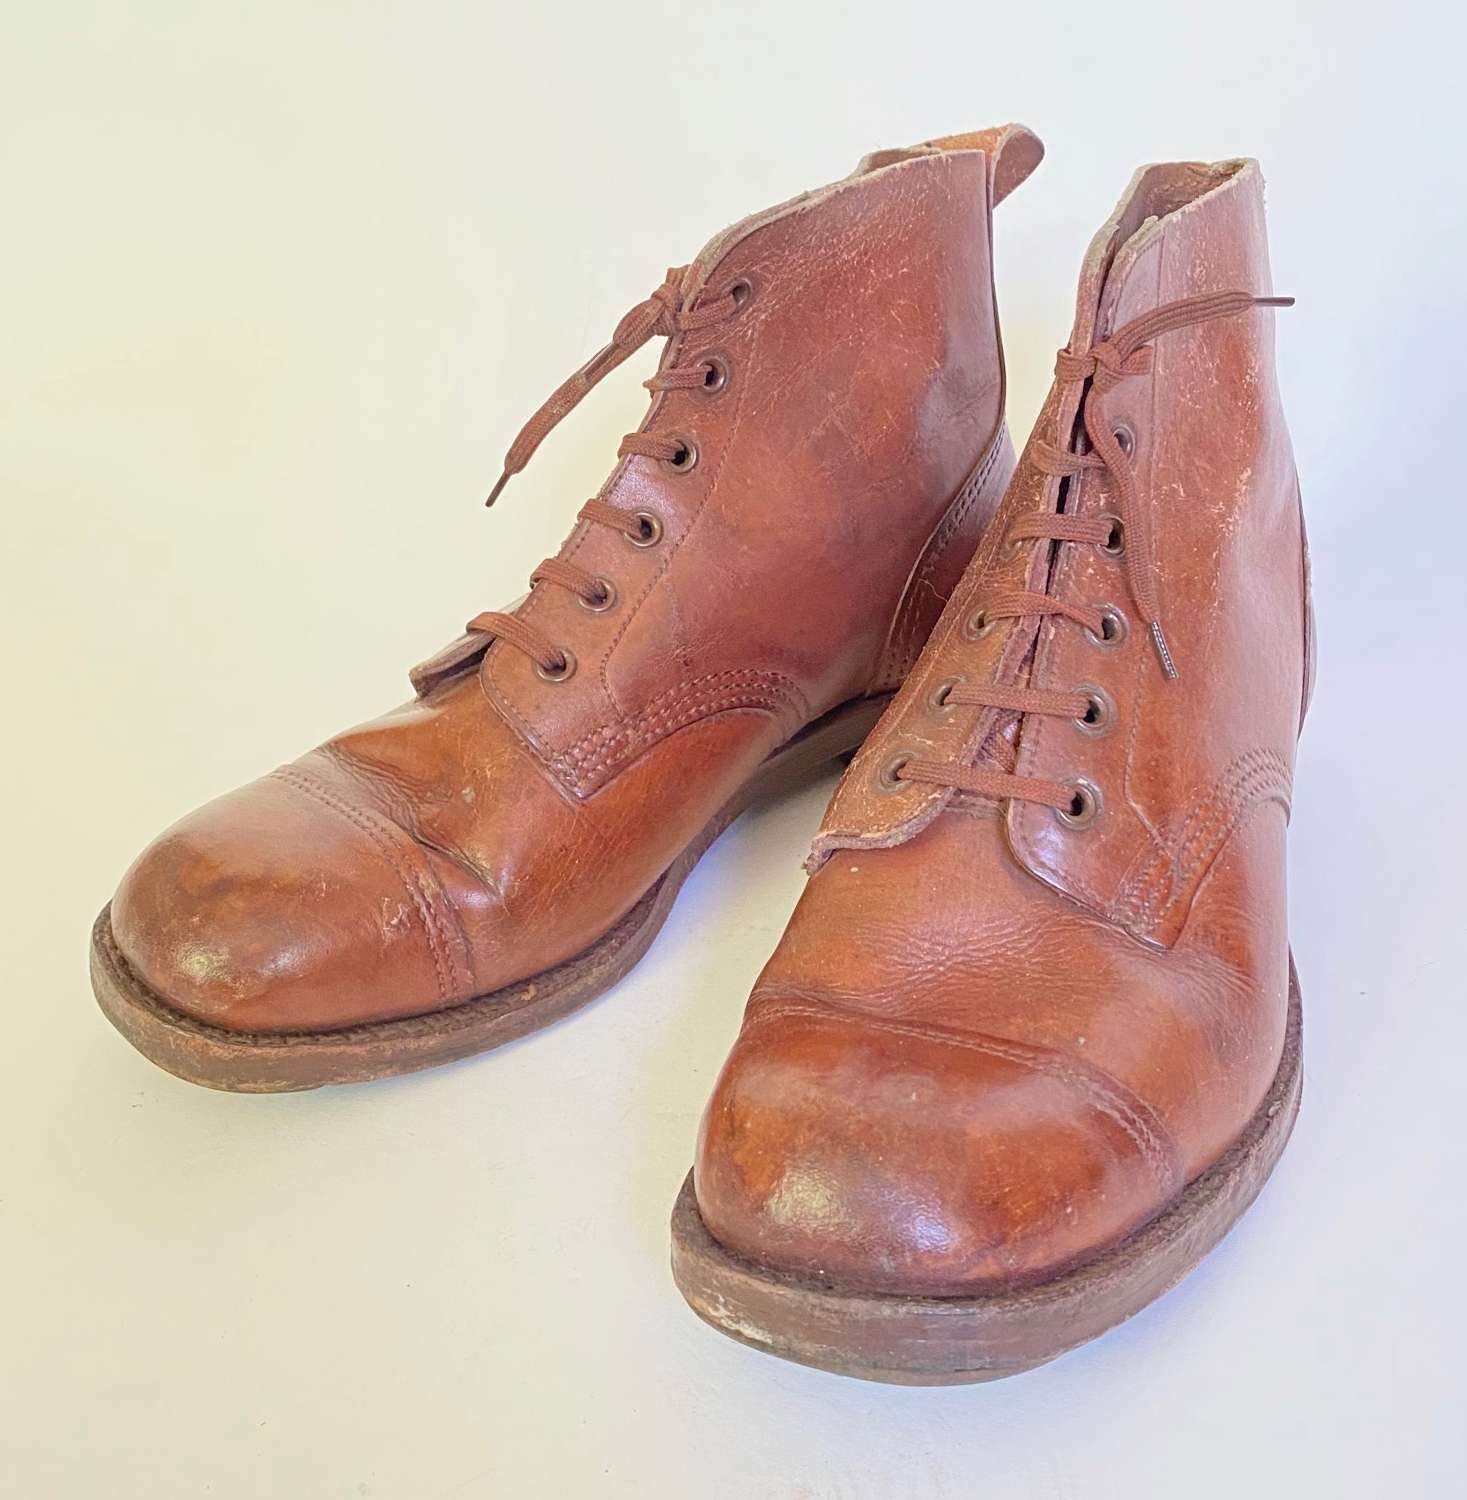 WW2 Period British Army Officer's Boots.